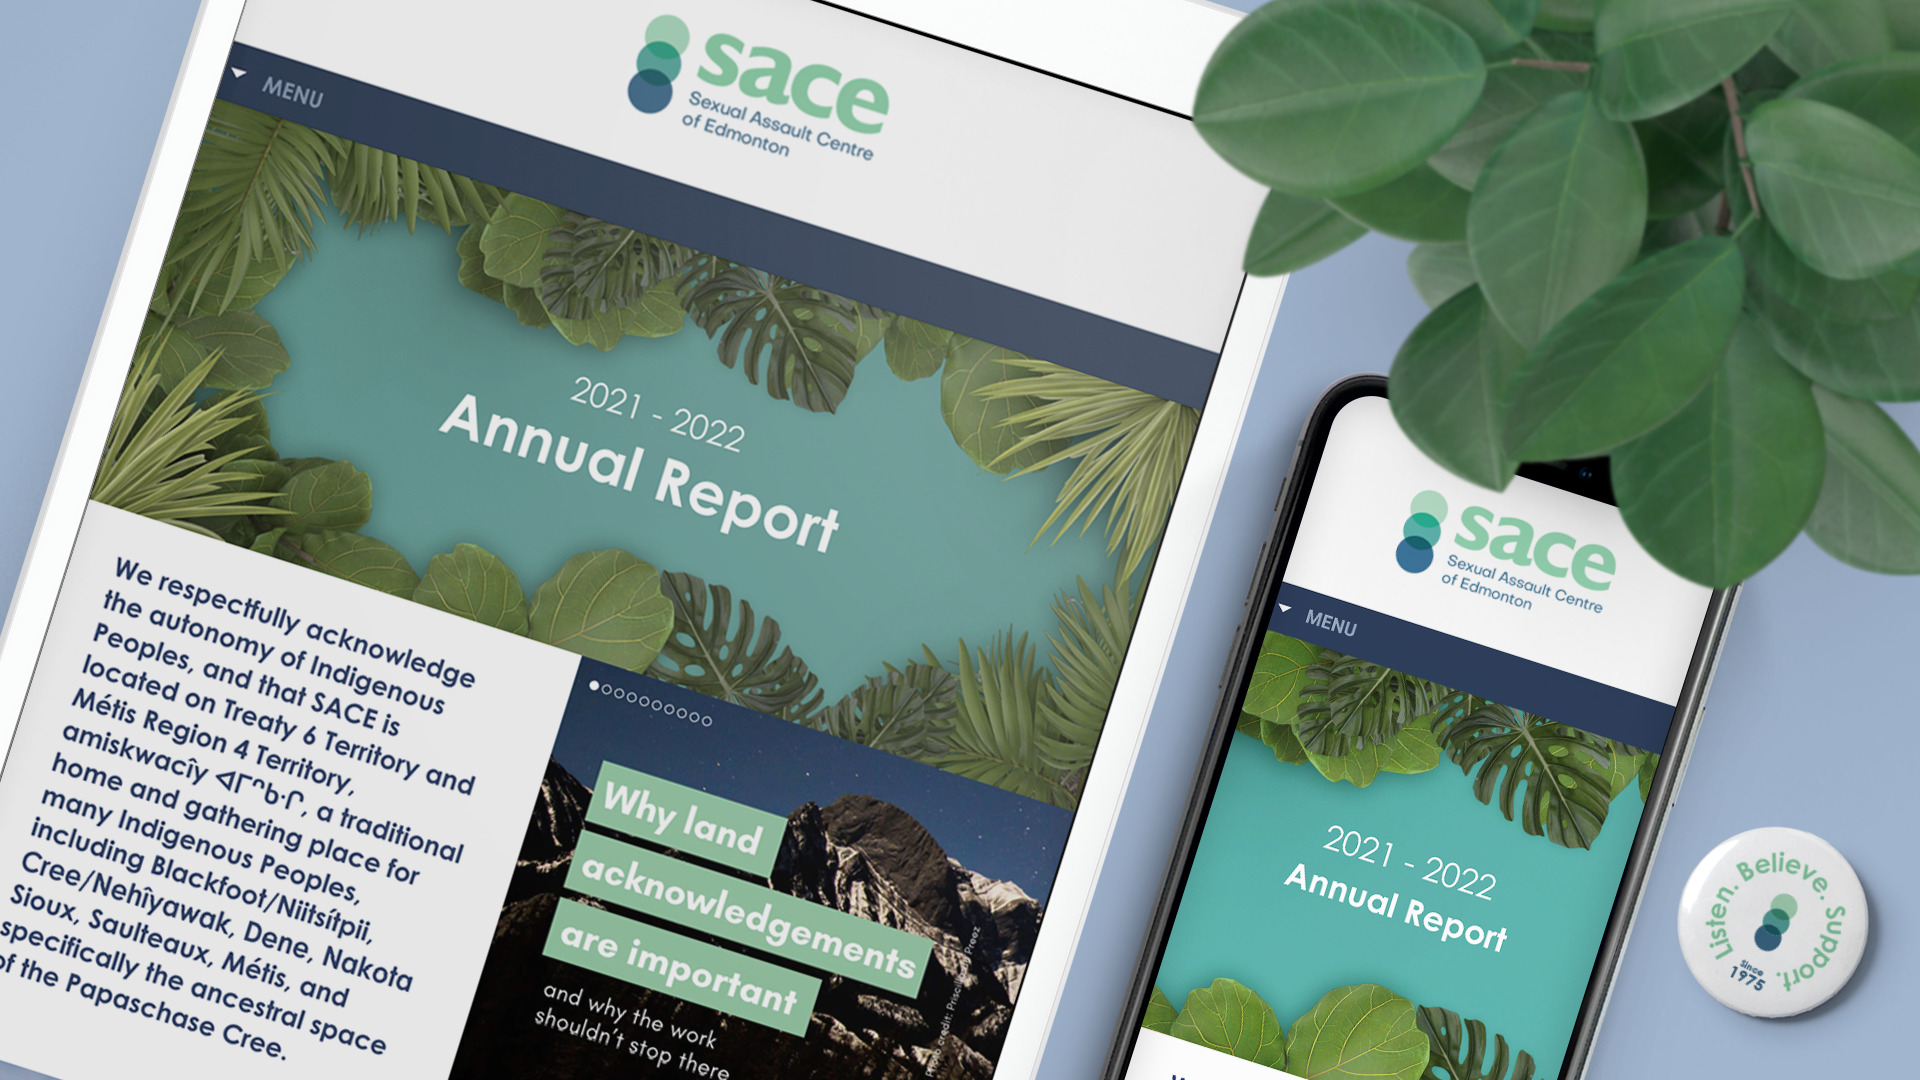 A tablet and smartphone displaying the 2021-2022 SACE Annual Report Land Acknowledgement with a leafy plant and white SACE button that reads "Listen. Believe. Support. Since 1975" on a blue background.